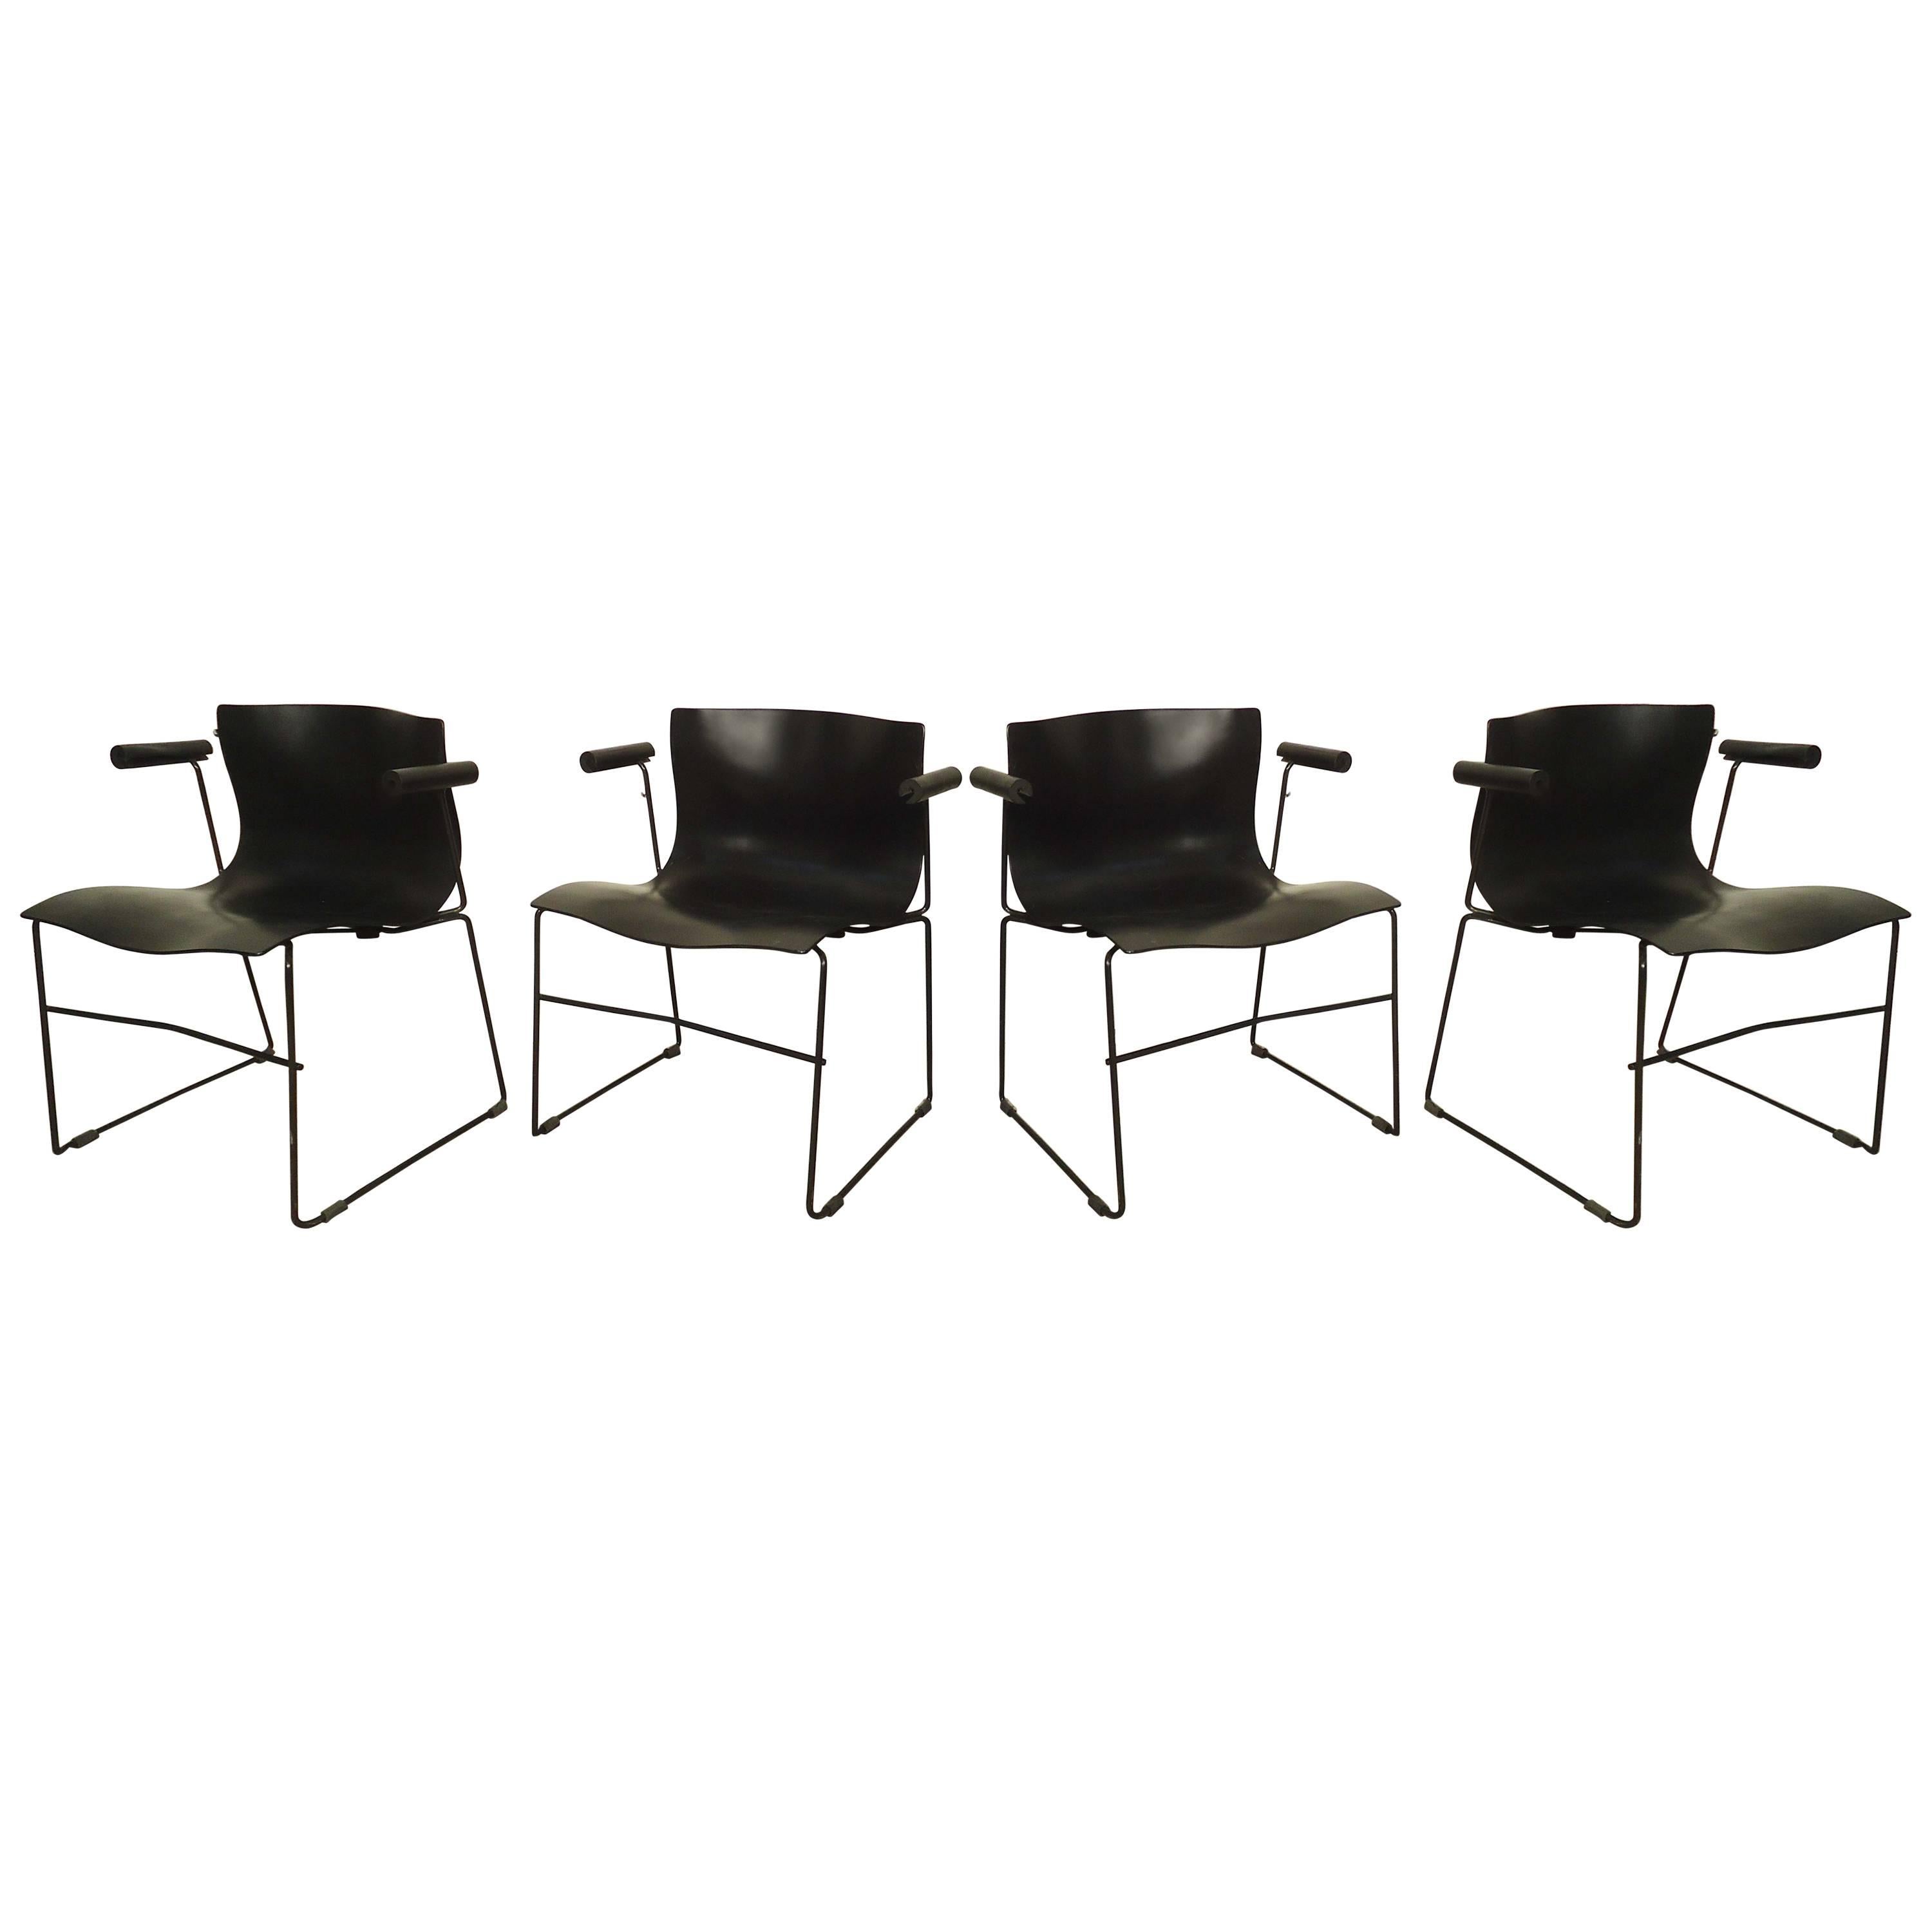 Set of Four Knoll "Handkerchief" Chairs